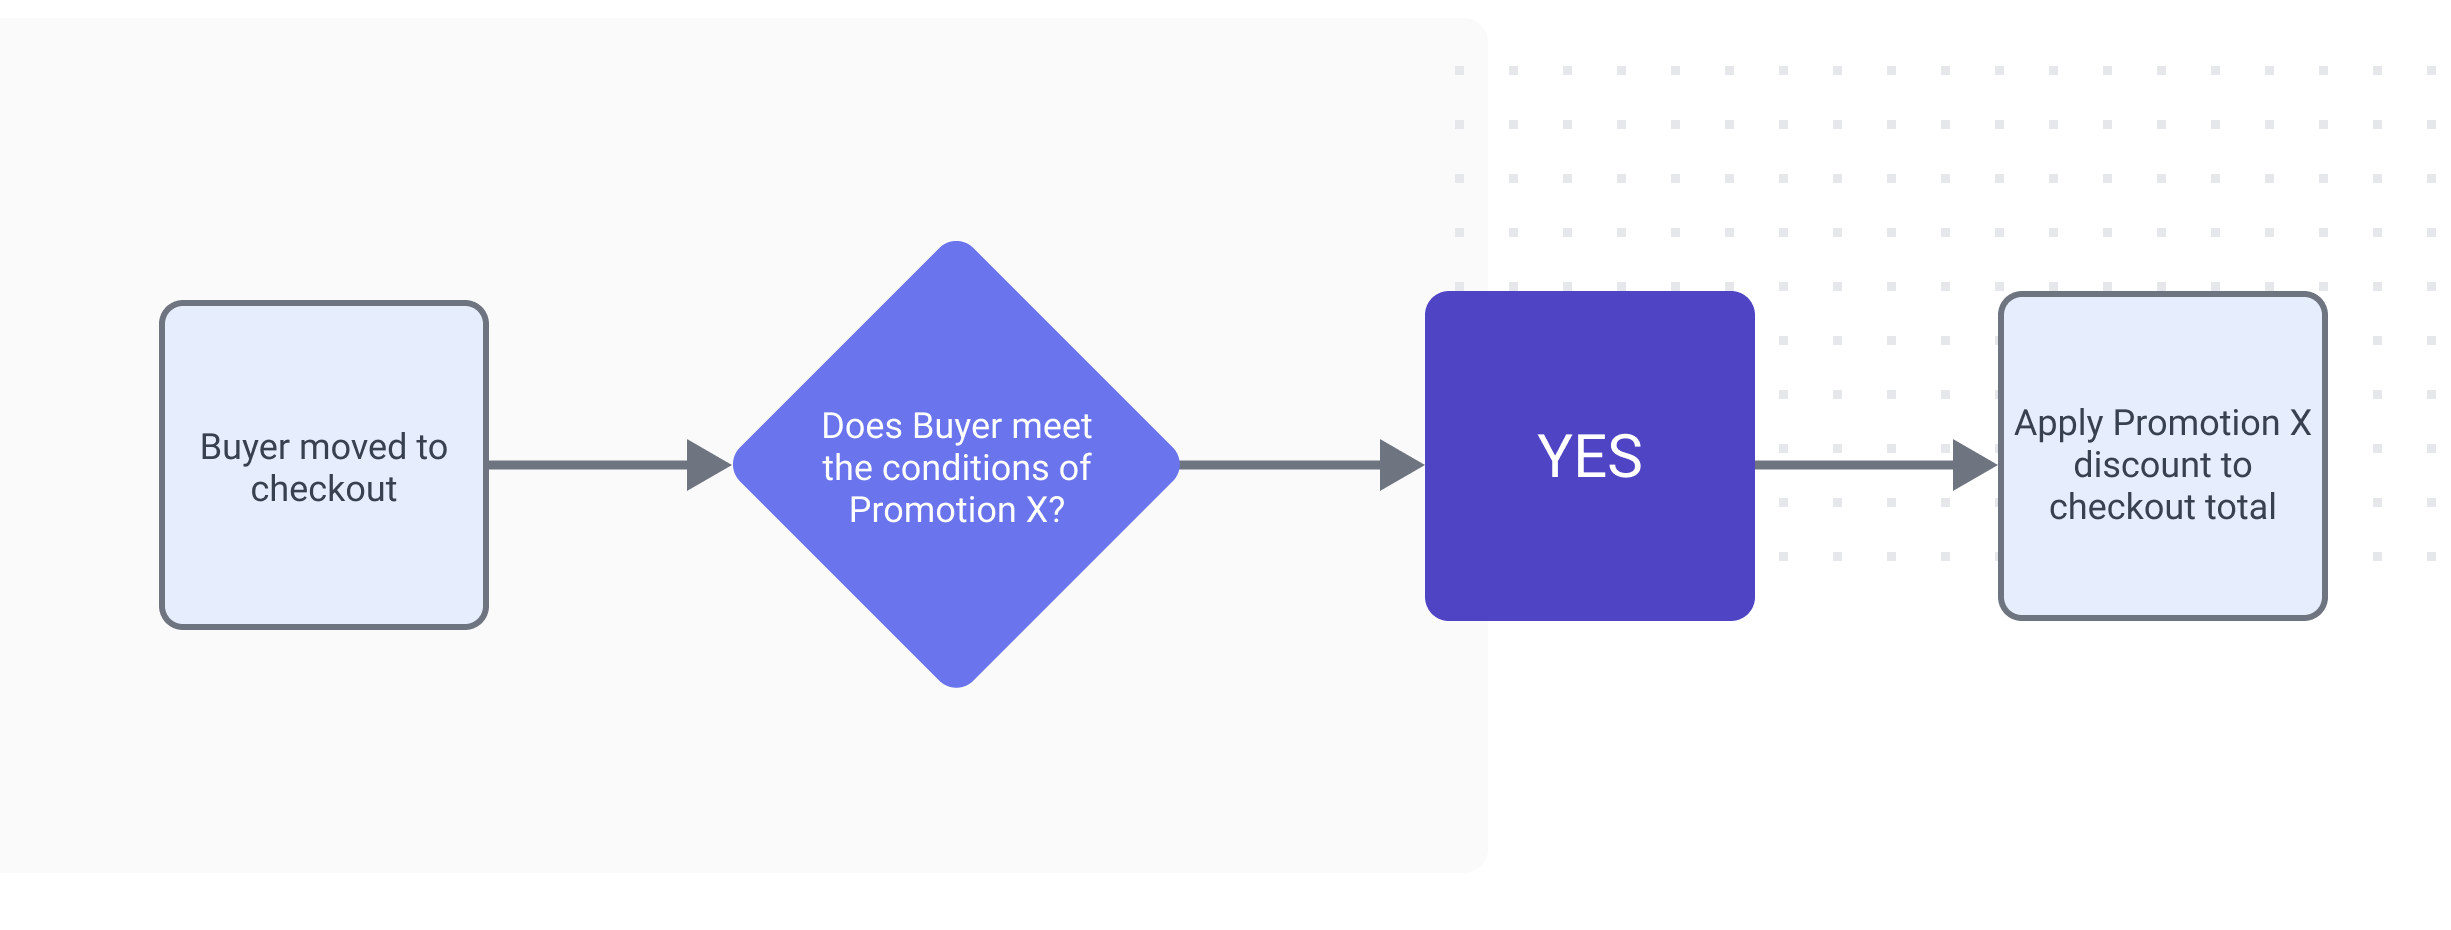 Buyer moved to checkout → Does Buyer meet the conditions of Promotion X? → YES → Apply Promotion X discount to checkout total